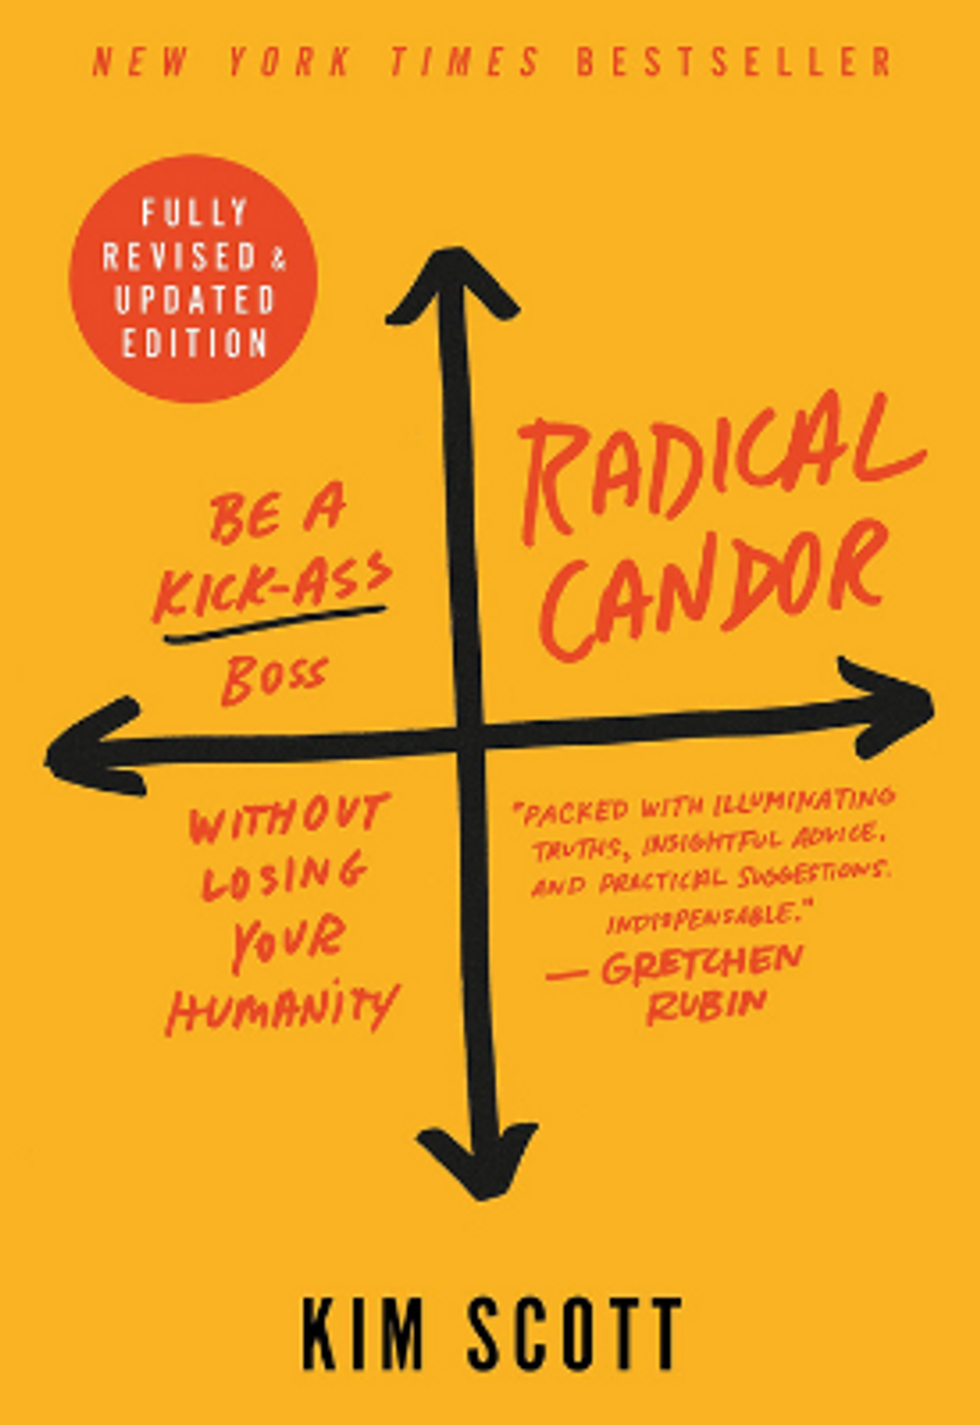 The front cover of the book "Radical Candor: Be a Kickass Boss Without Losing Your Humanity" by Kim Malone Scott